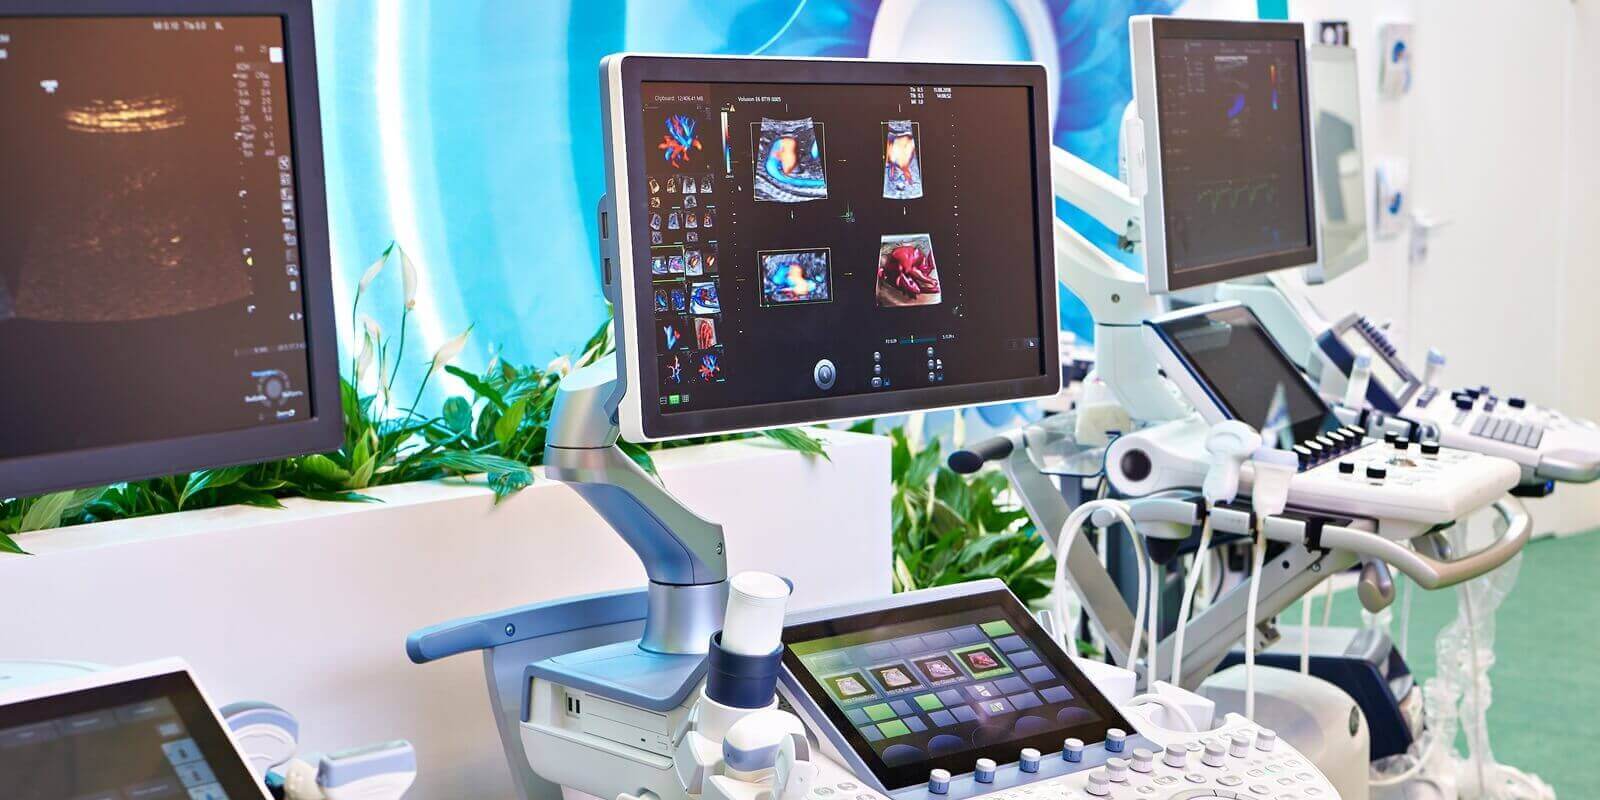 medical ultrasound devices on exhibition